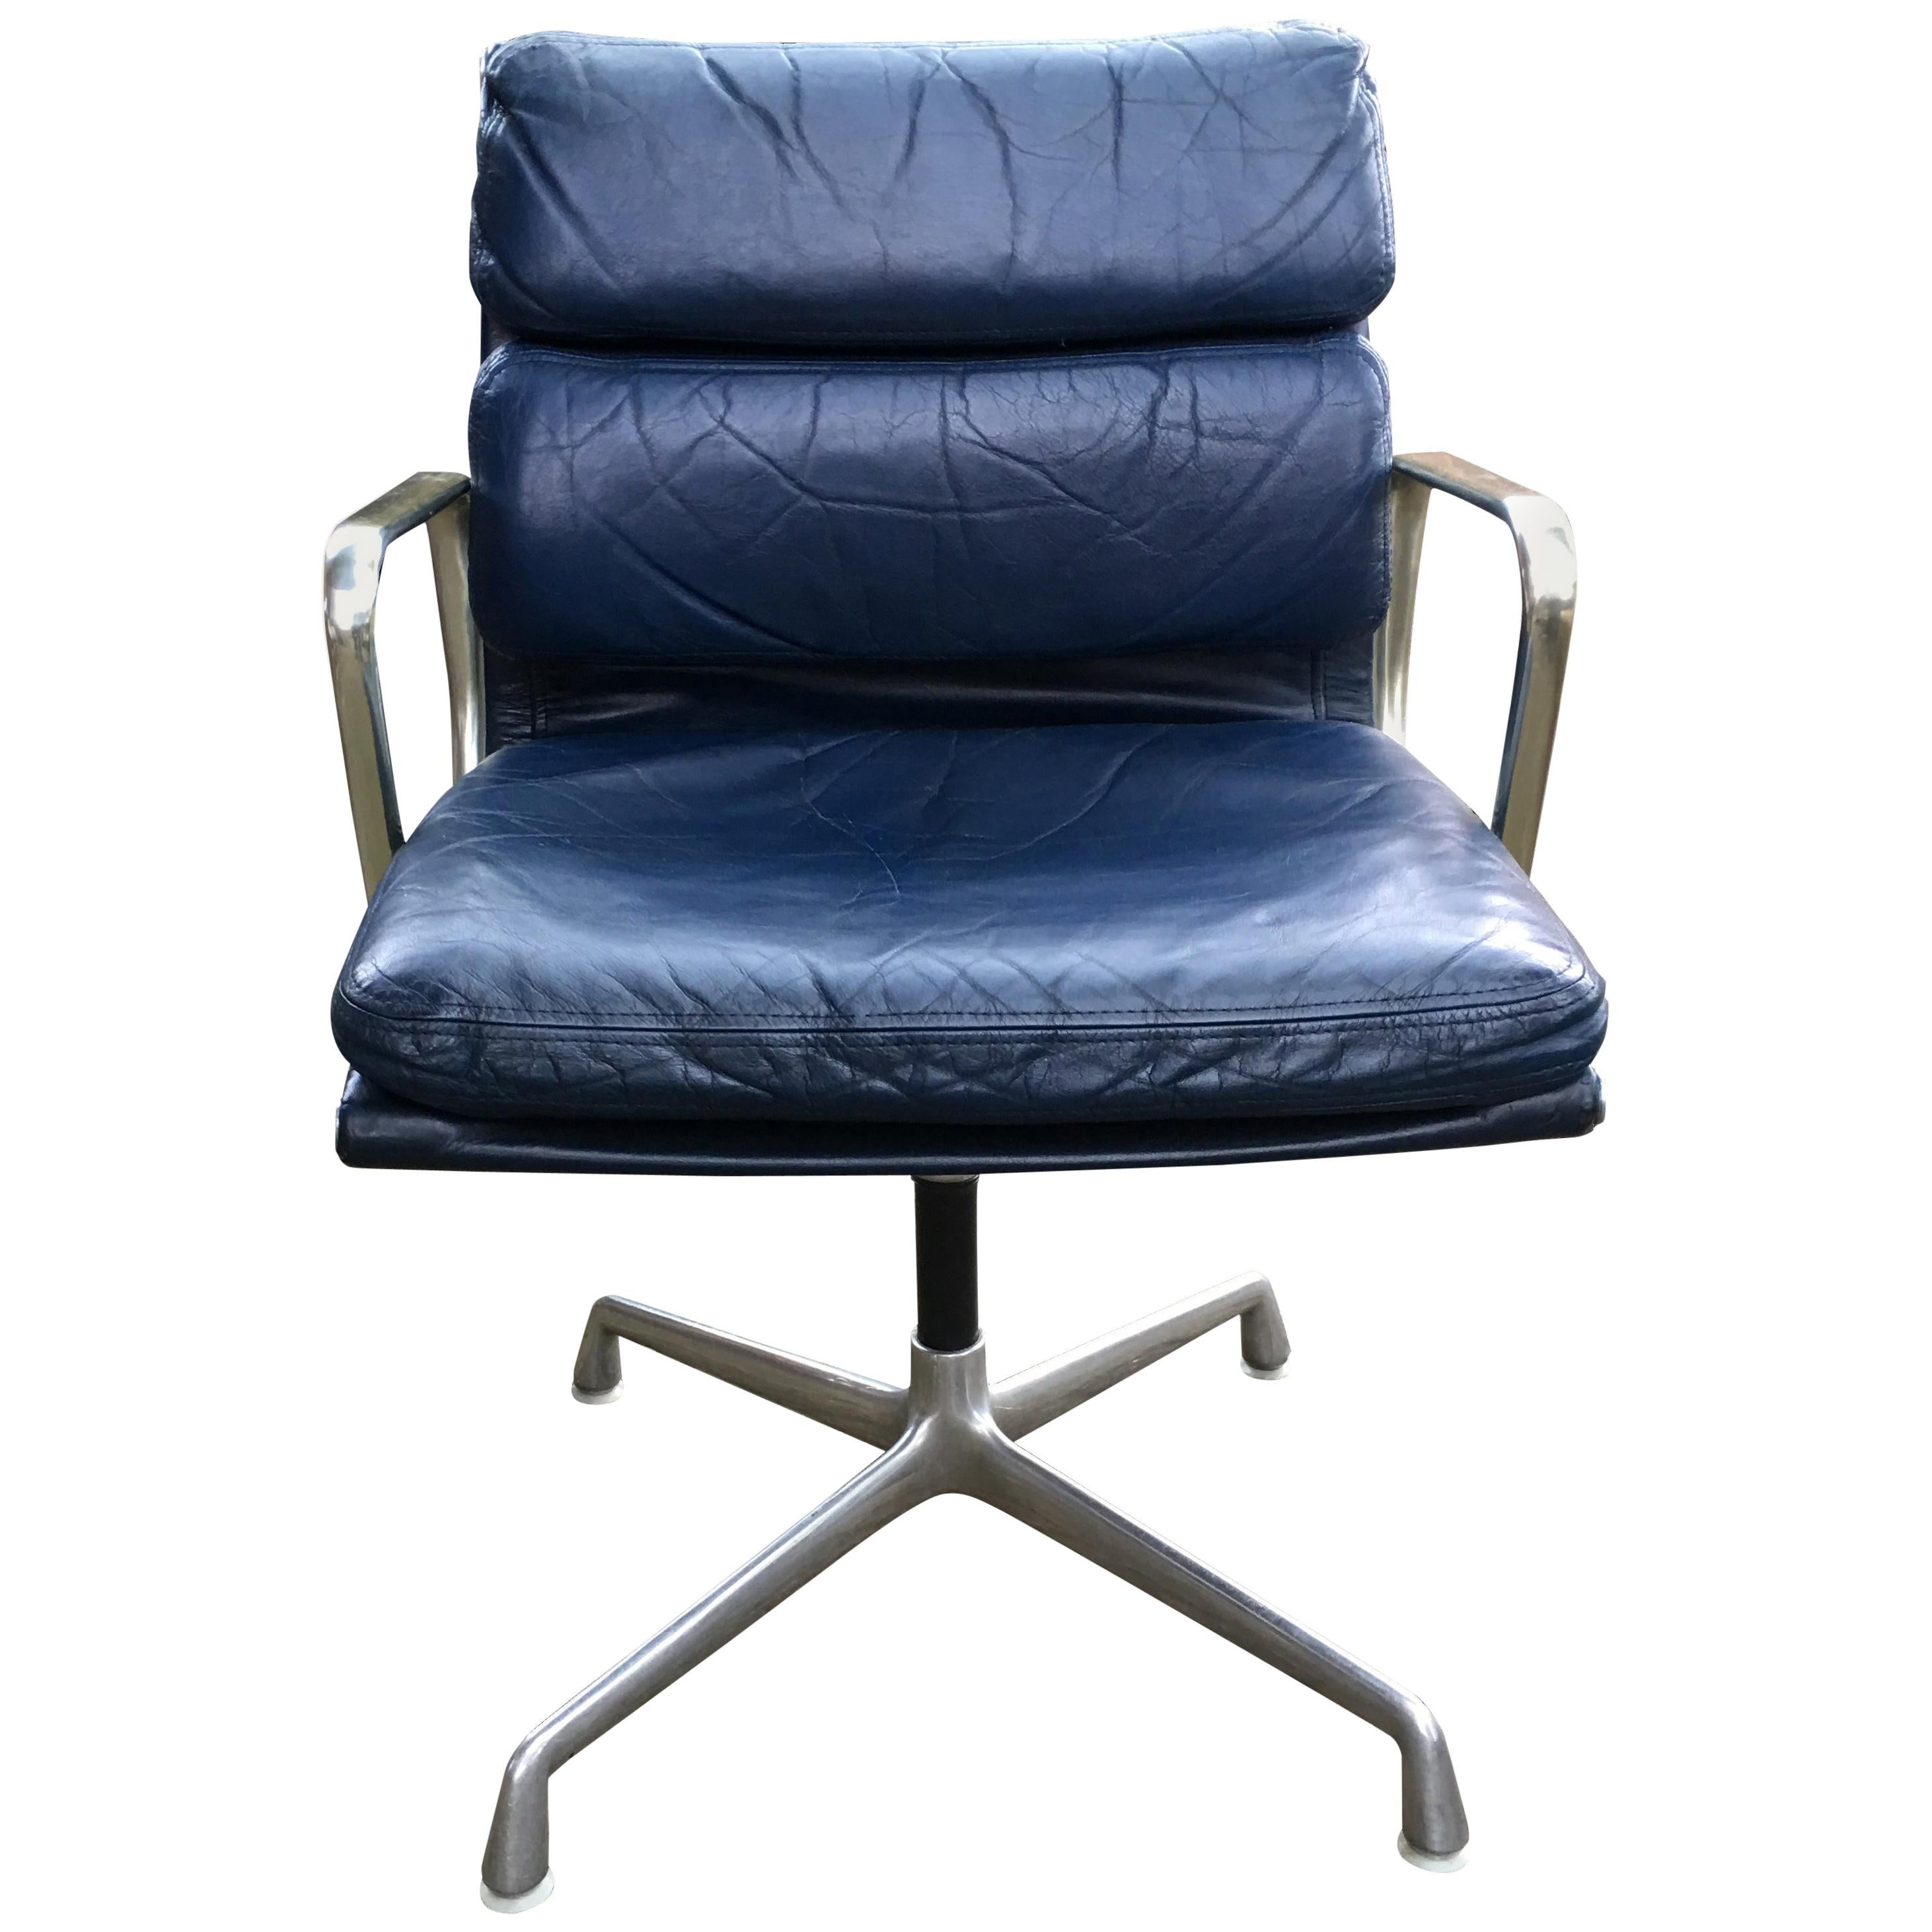 Eames Blue Leather Soft Pad Swivel Armchair for Herman Miller